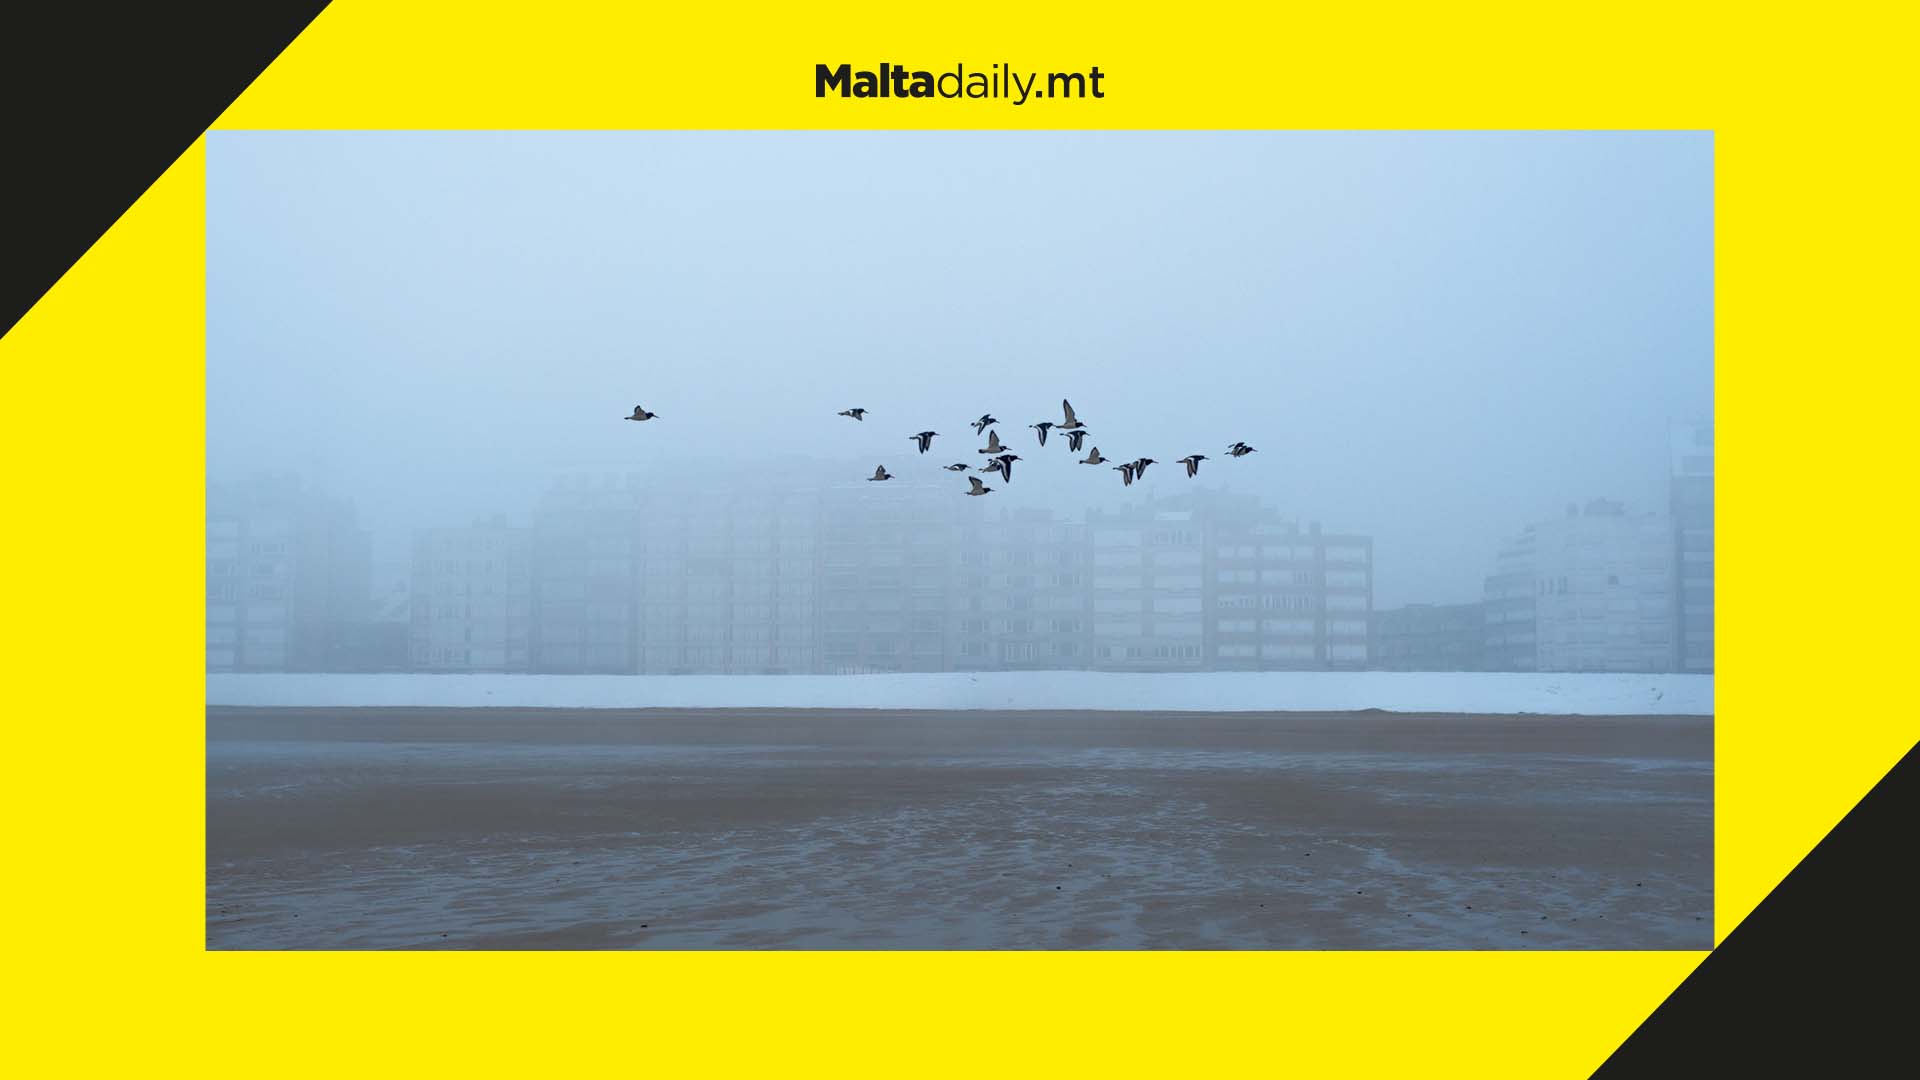 October's foggy day was also the hottest day of the month with temperatures of 29°C